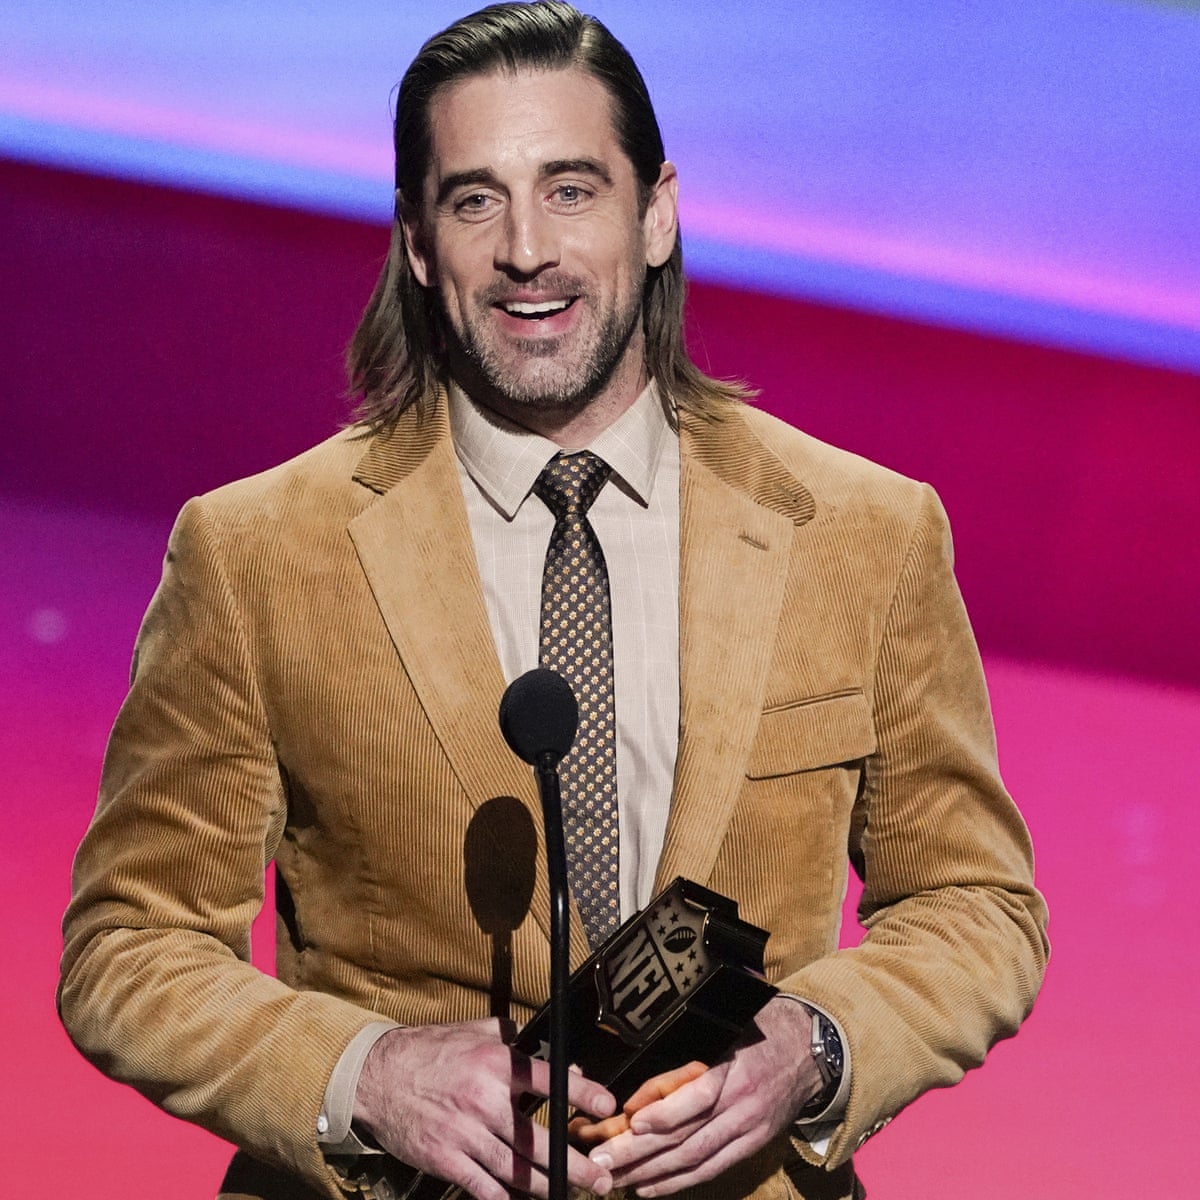 Aaron Rodgers named NFL MVP for fourth time after tumultuous season, NFL